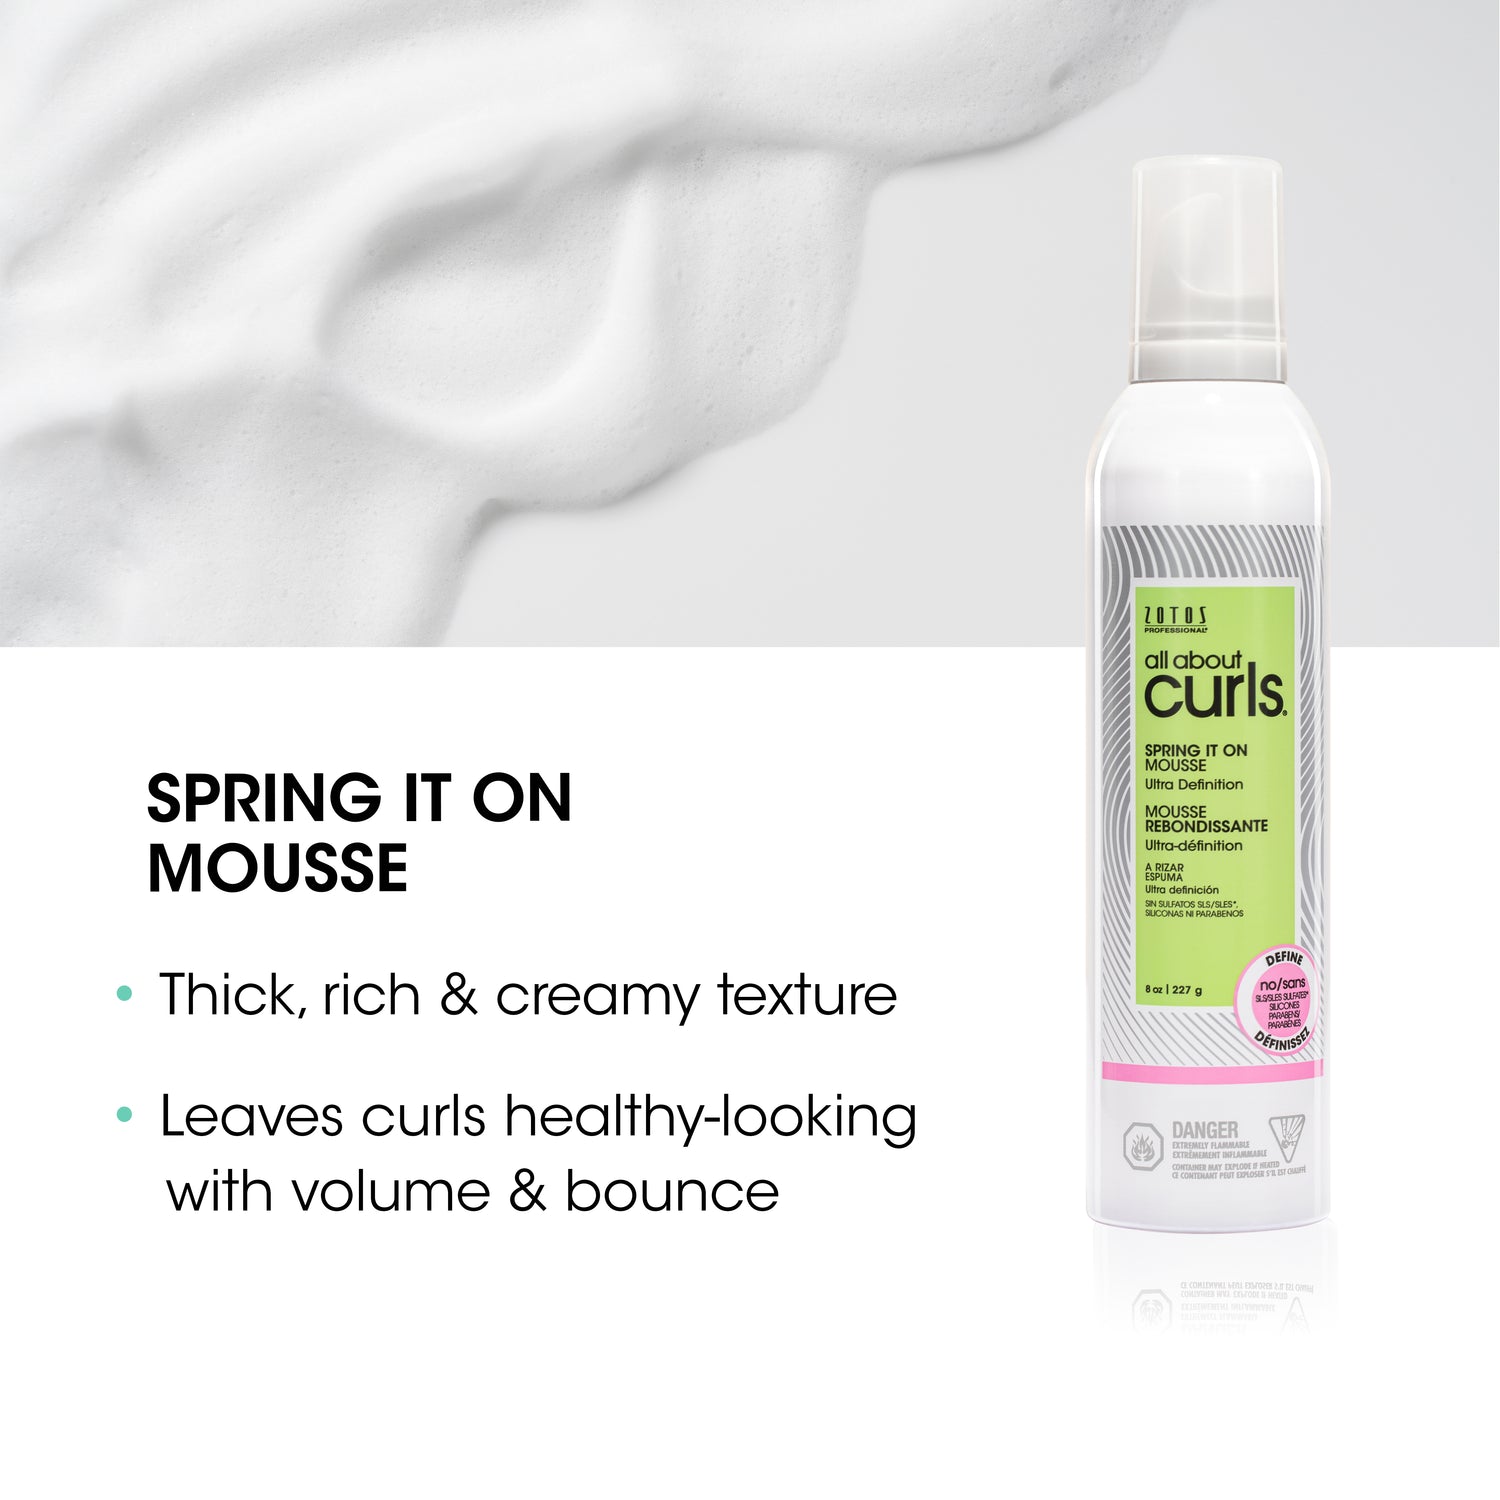 All About Curls® Spring It On Mousse